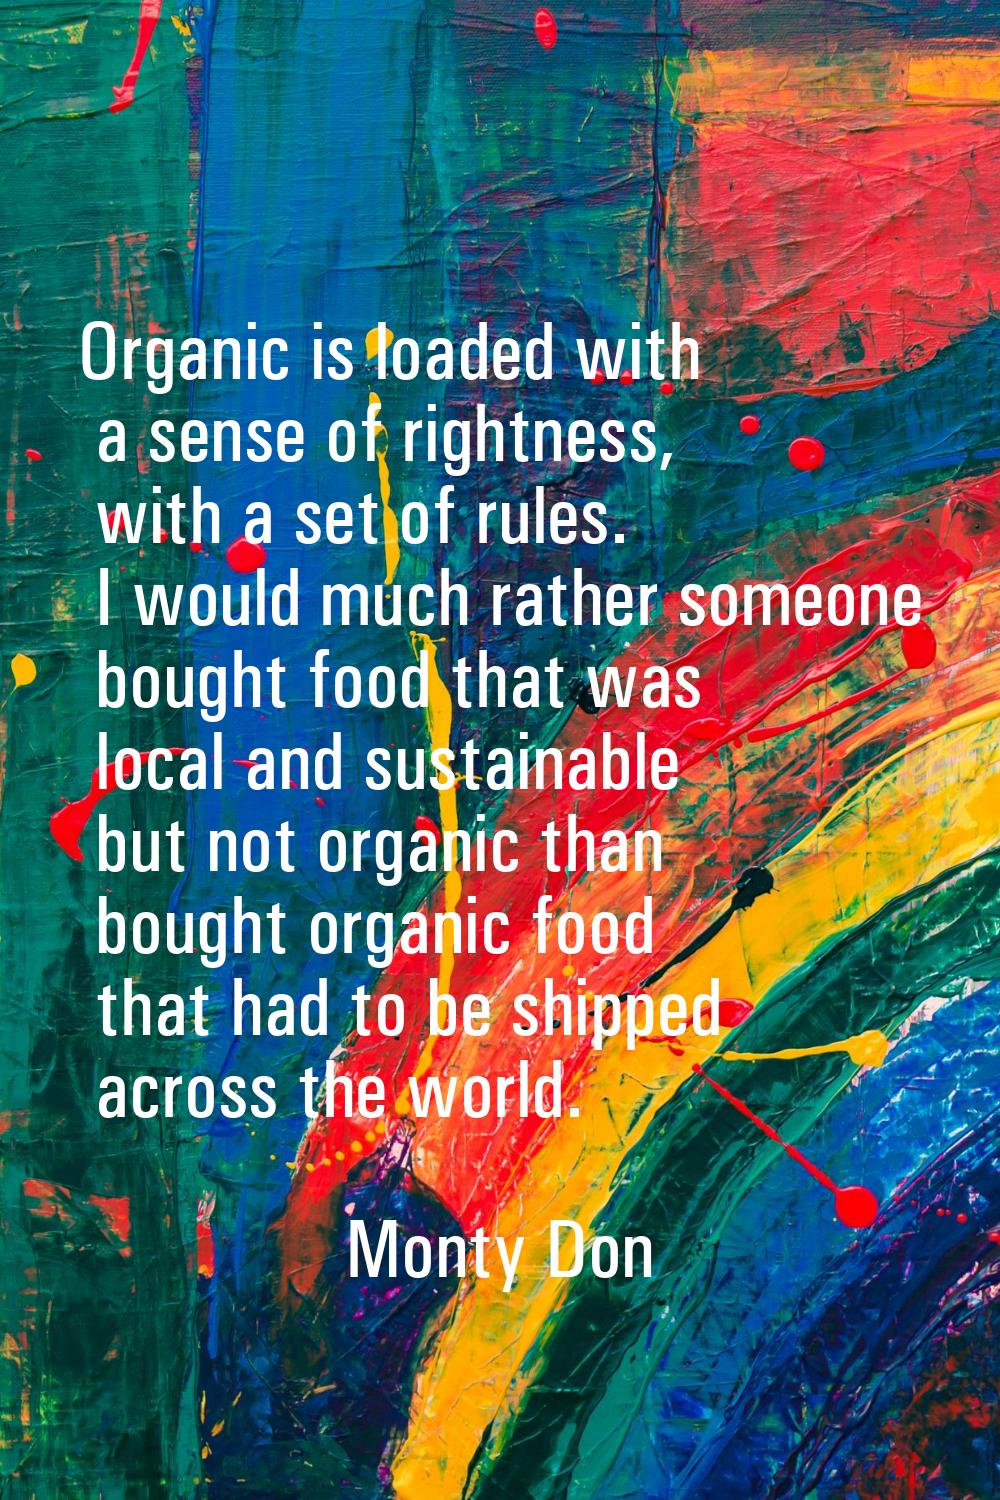 Organic is loaded with a sense of rightness, with a set of rules. I would much rather someone bough